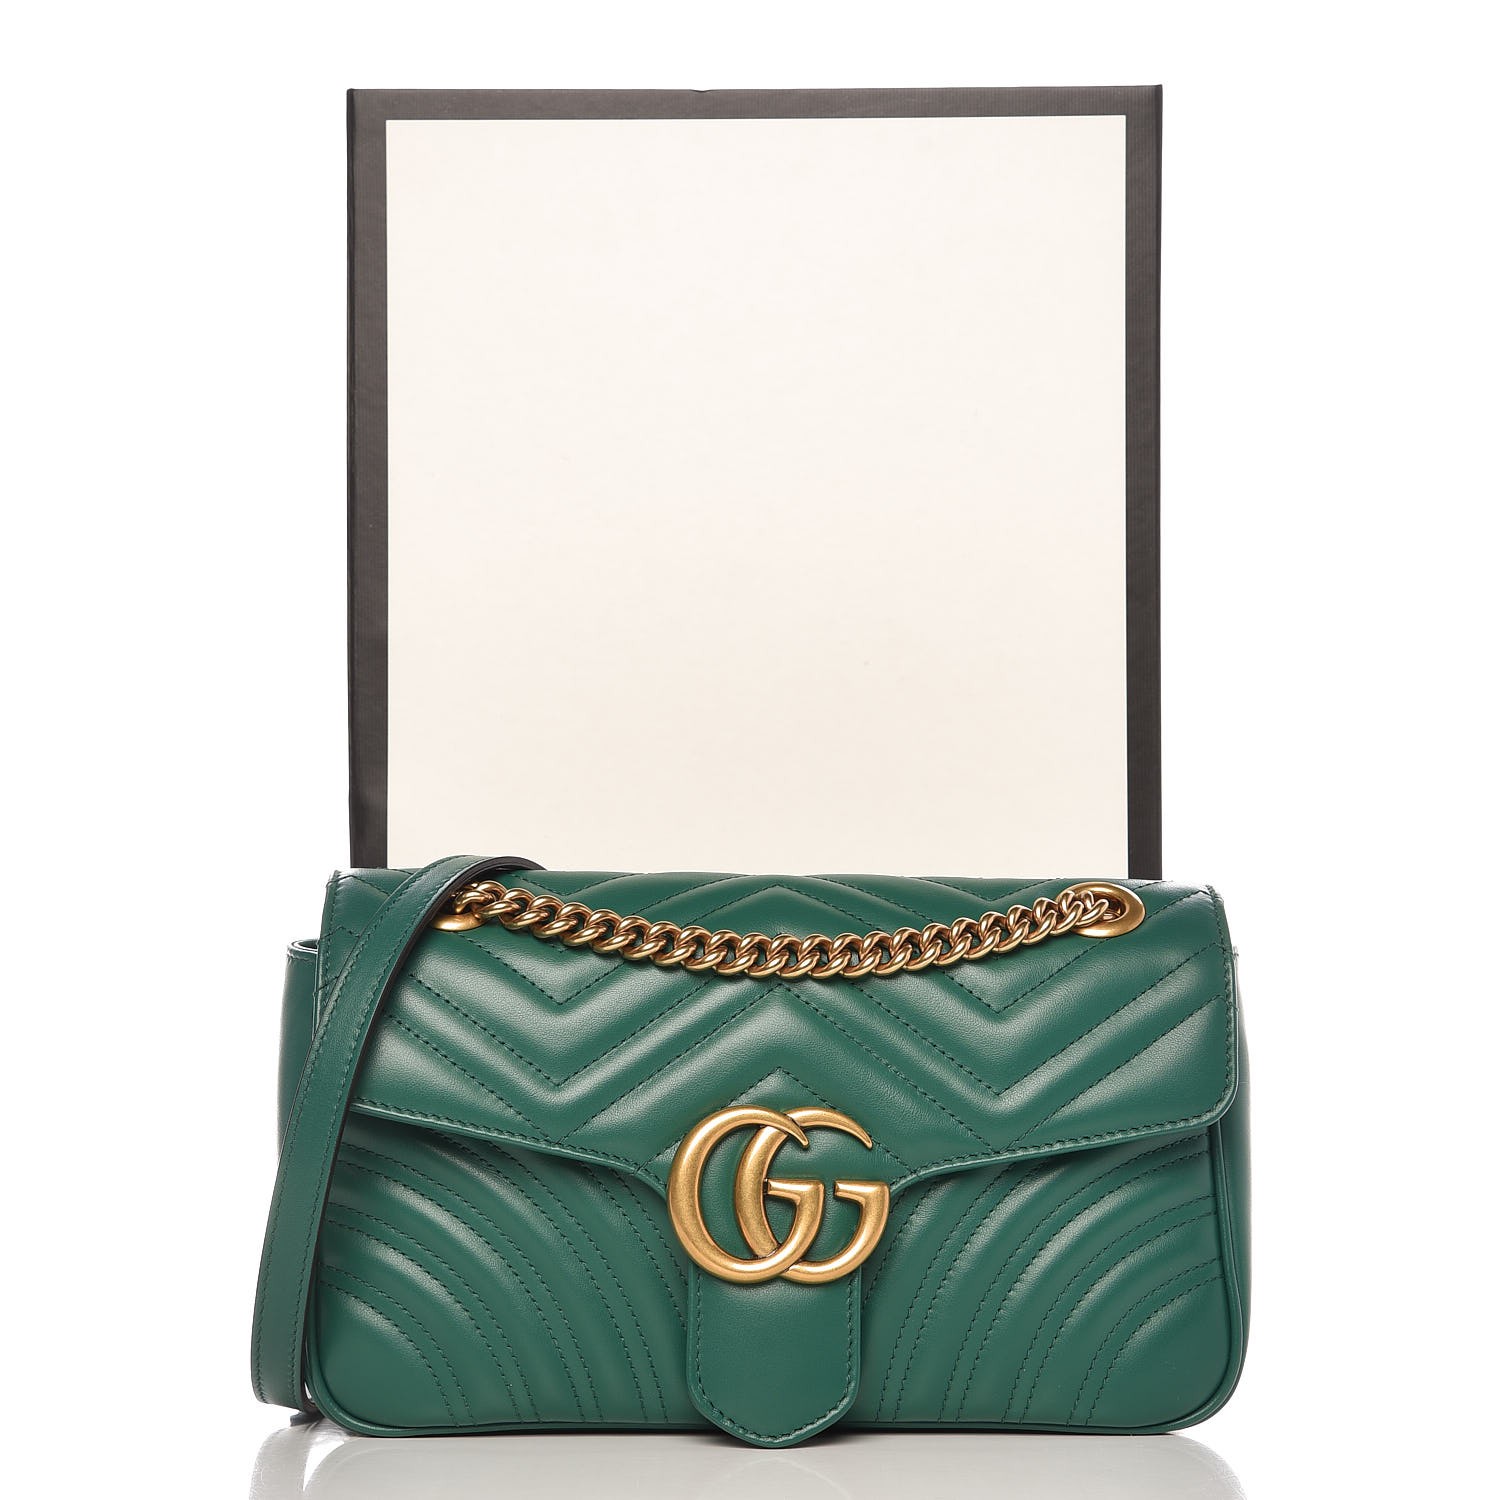 green marmont gucci